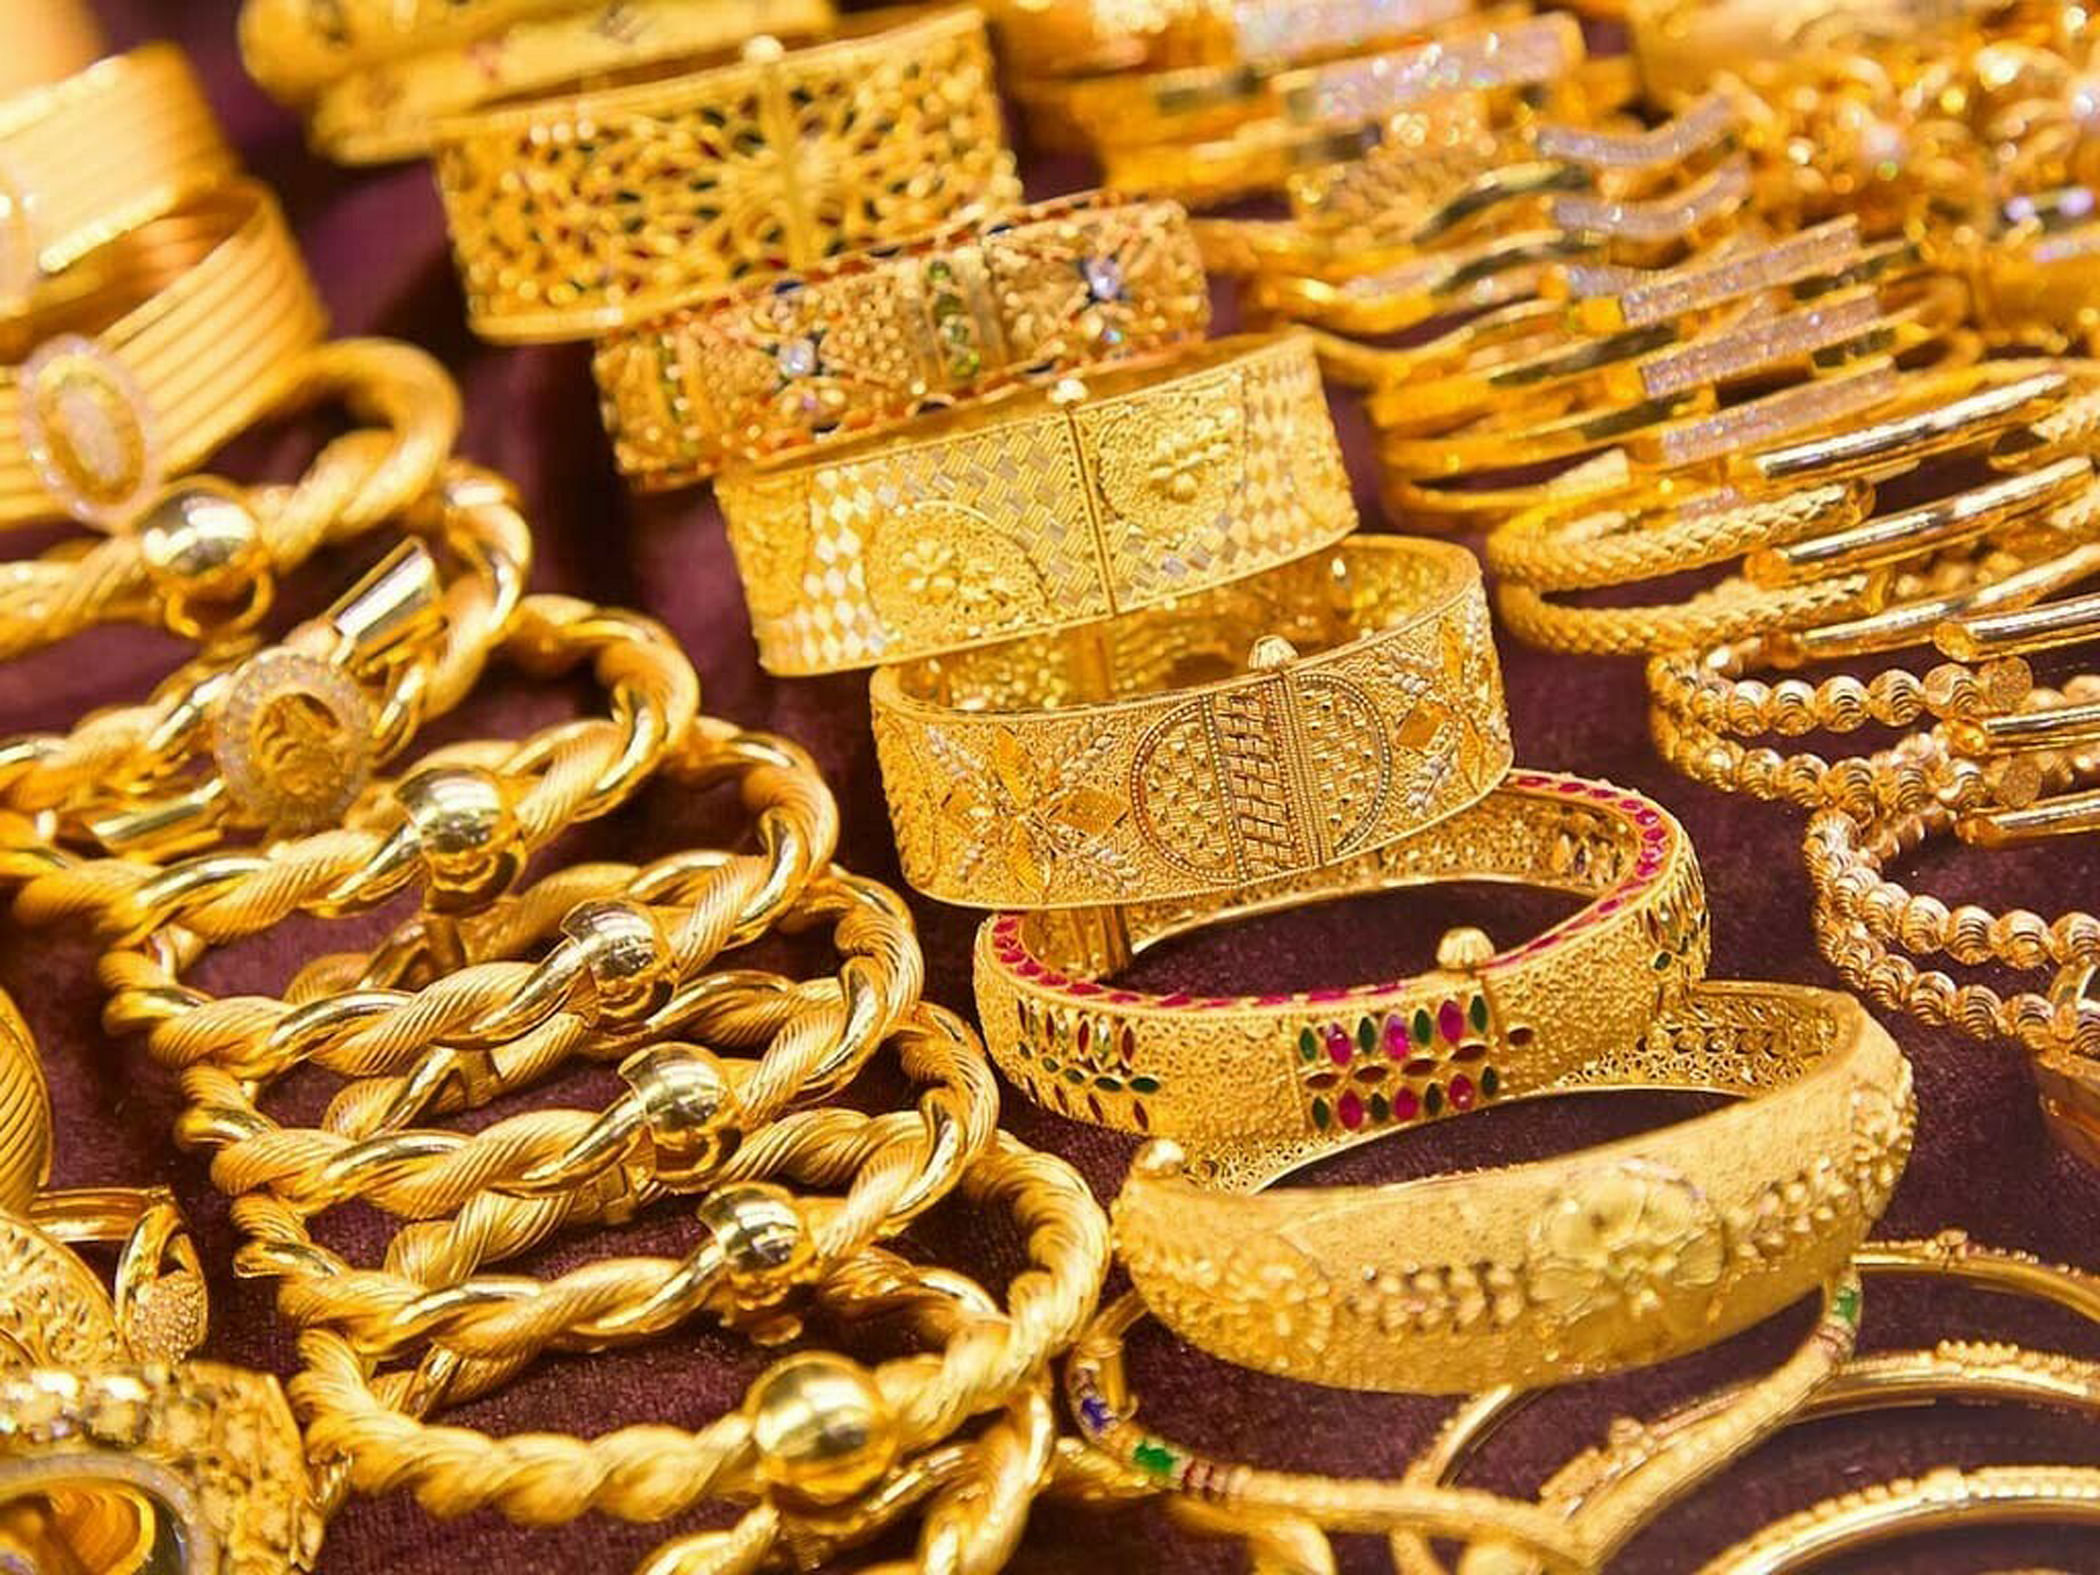 Gold price hiked to Tk 114,074, a new record | The Daily Star